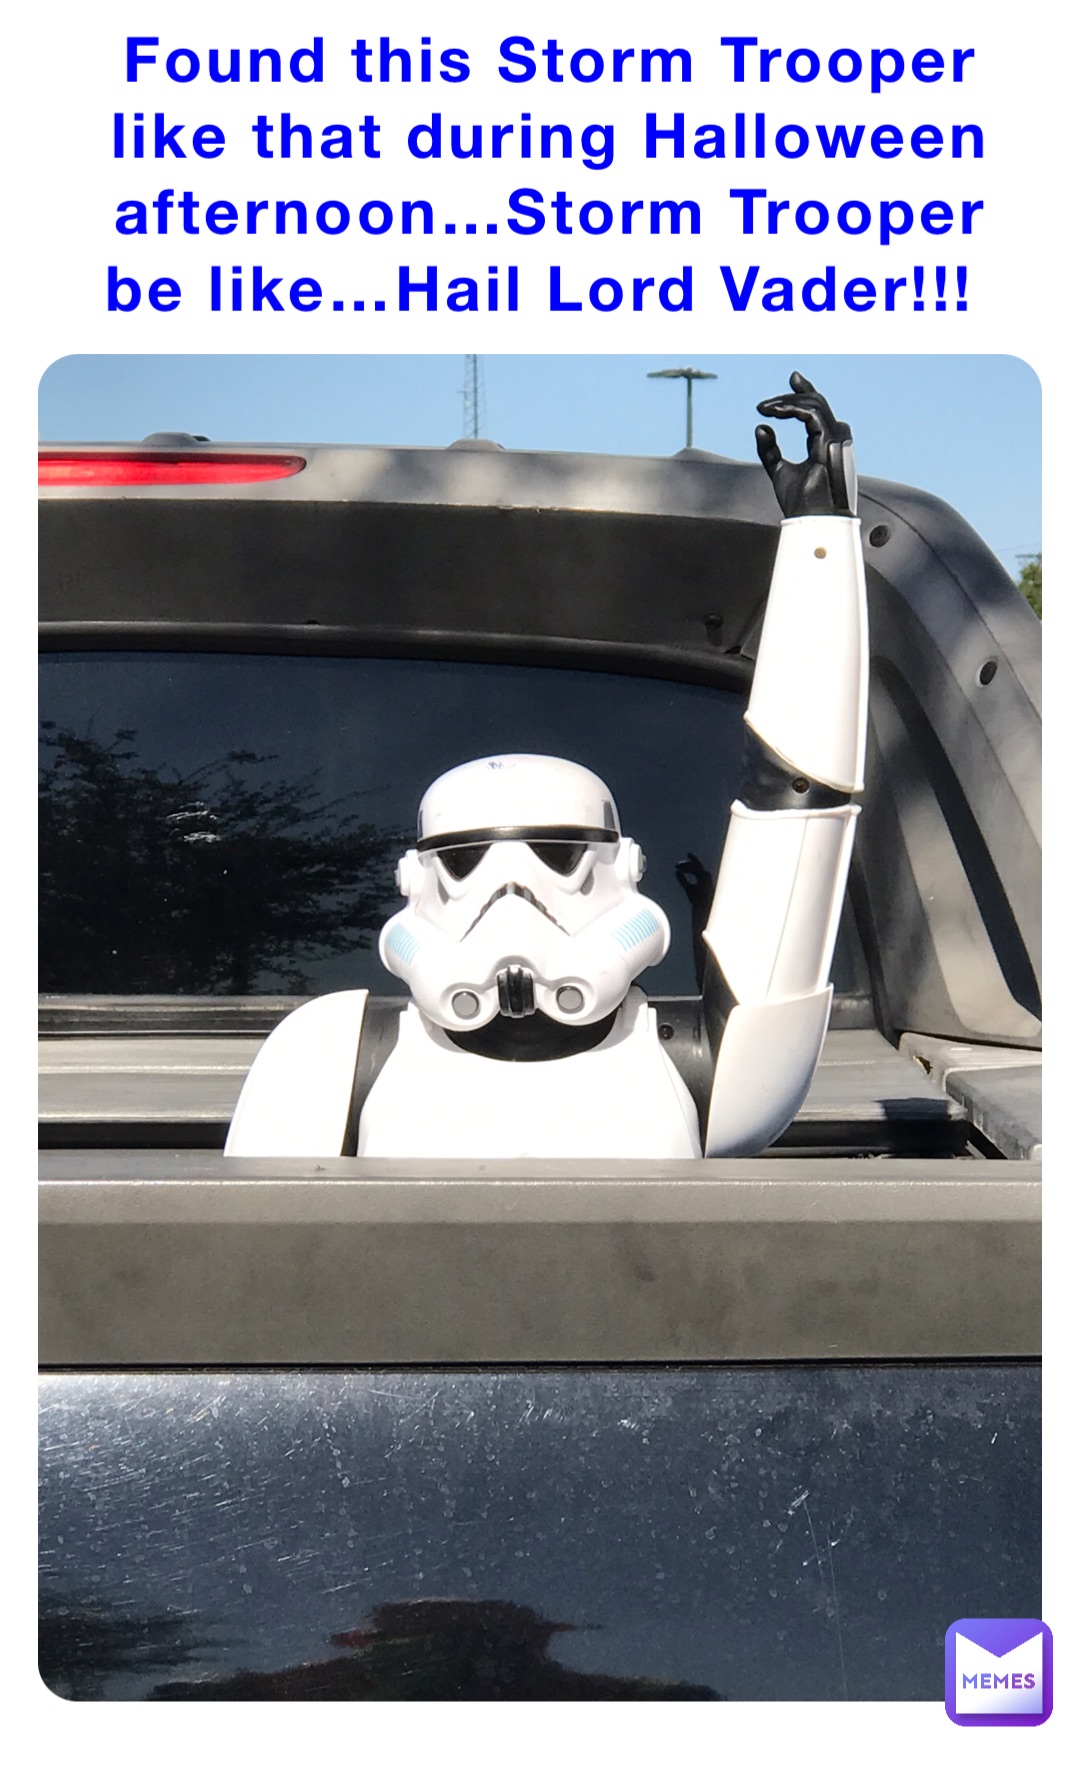 Found this Storm Trooper like that during Halloween afternoon…Storm Trooper be like…Hail Lord Vader!!!